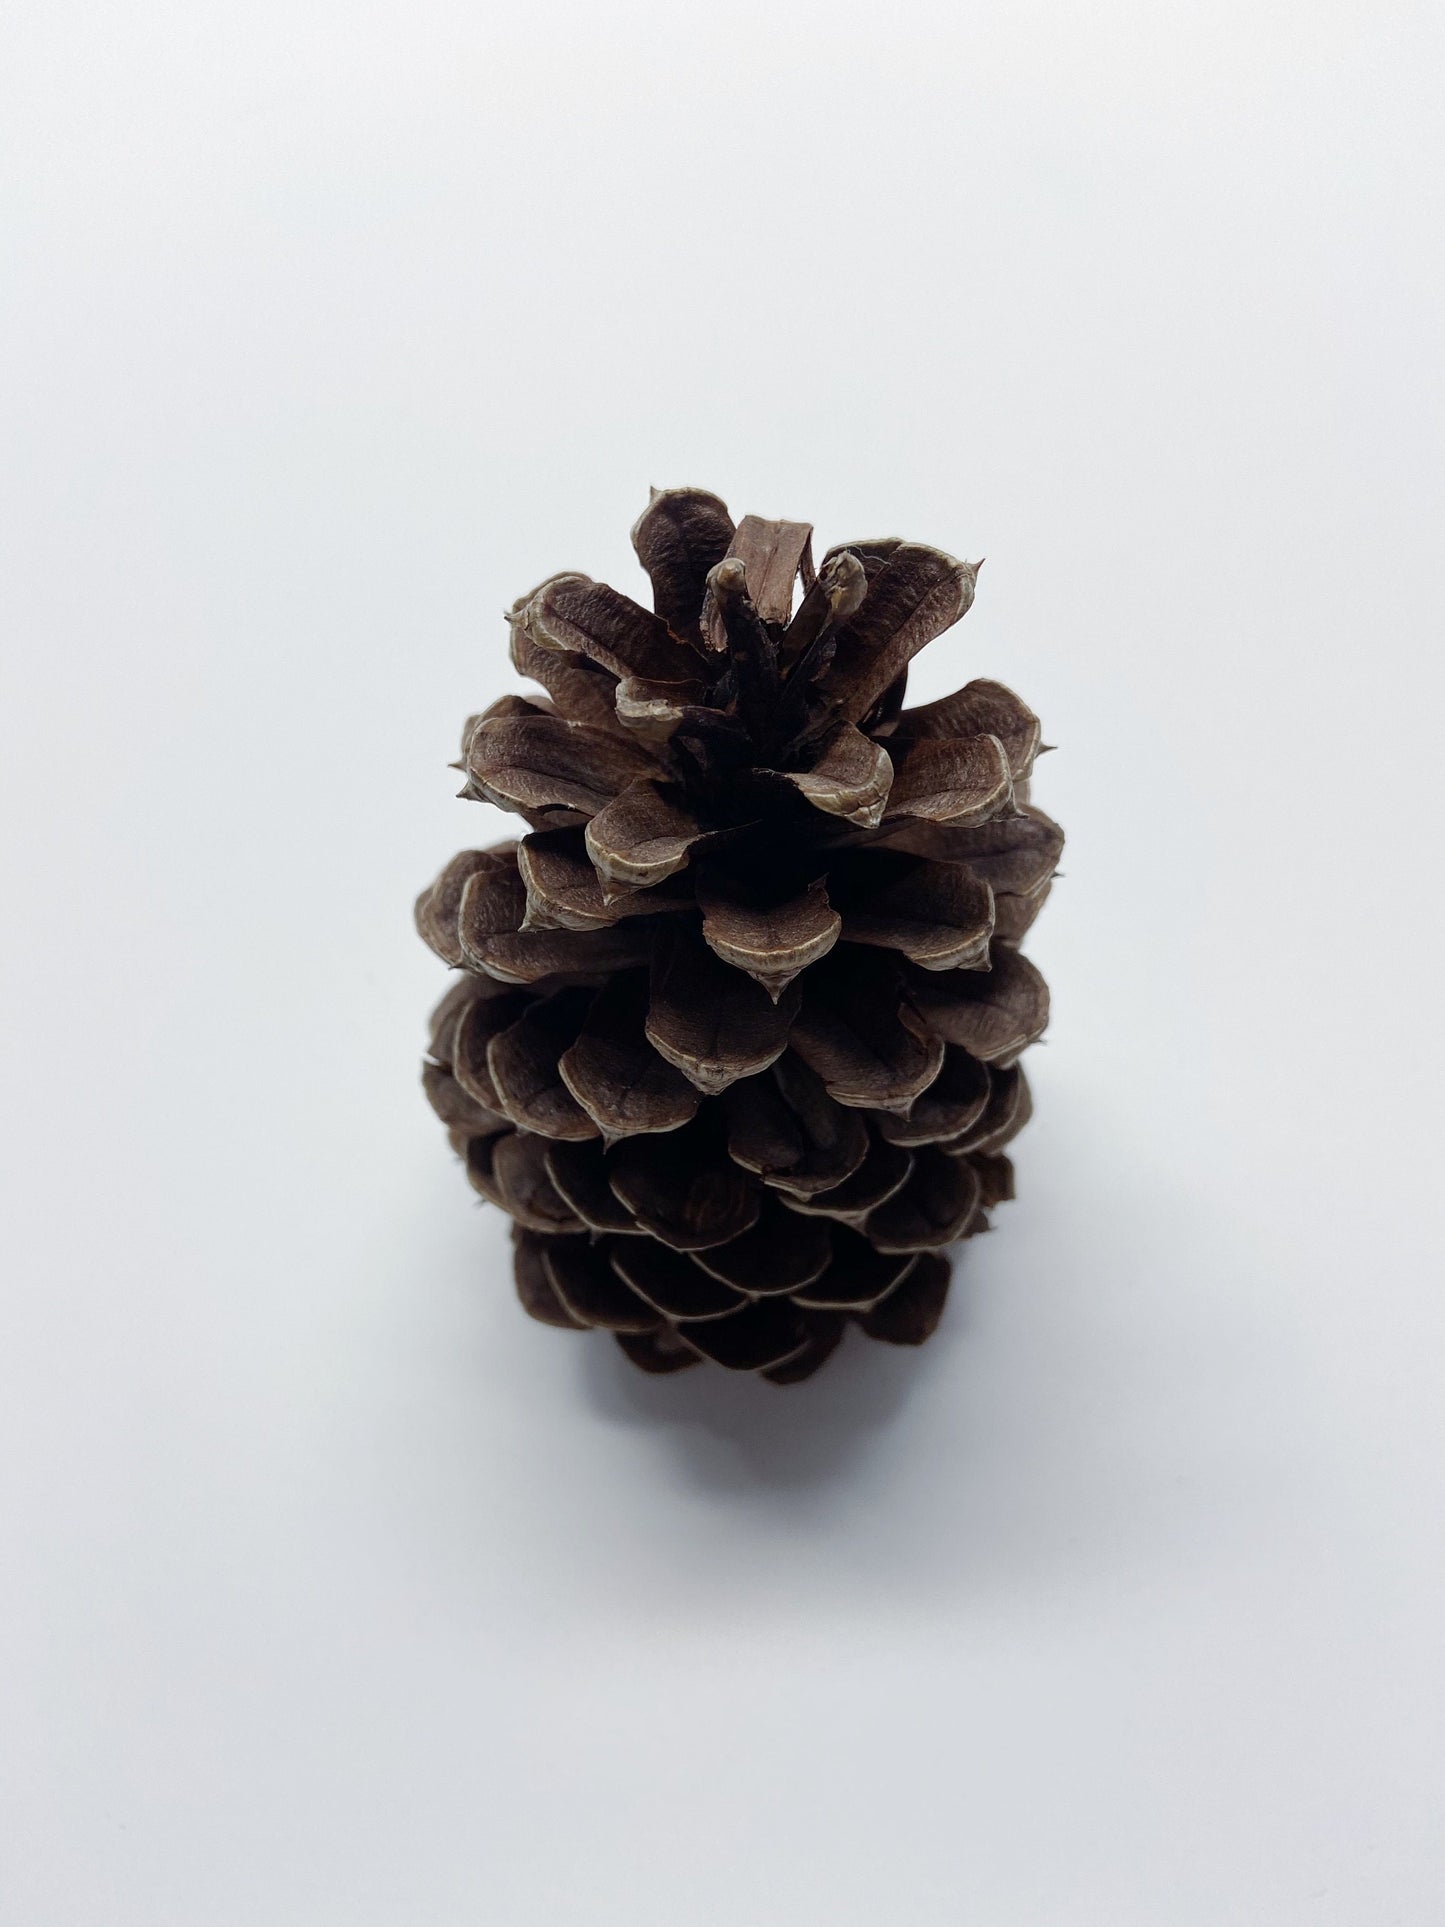 5 pinecones, natural pinecones, real, Christmas decoration, winter, artandcraft, home decor, real pinecones, round pinecones, tall pinecones